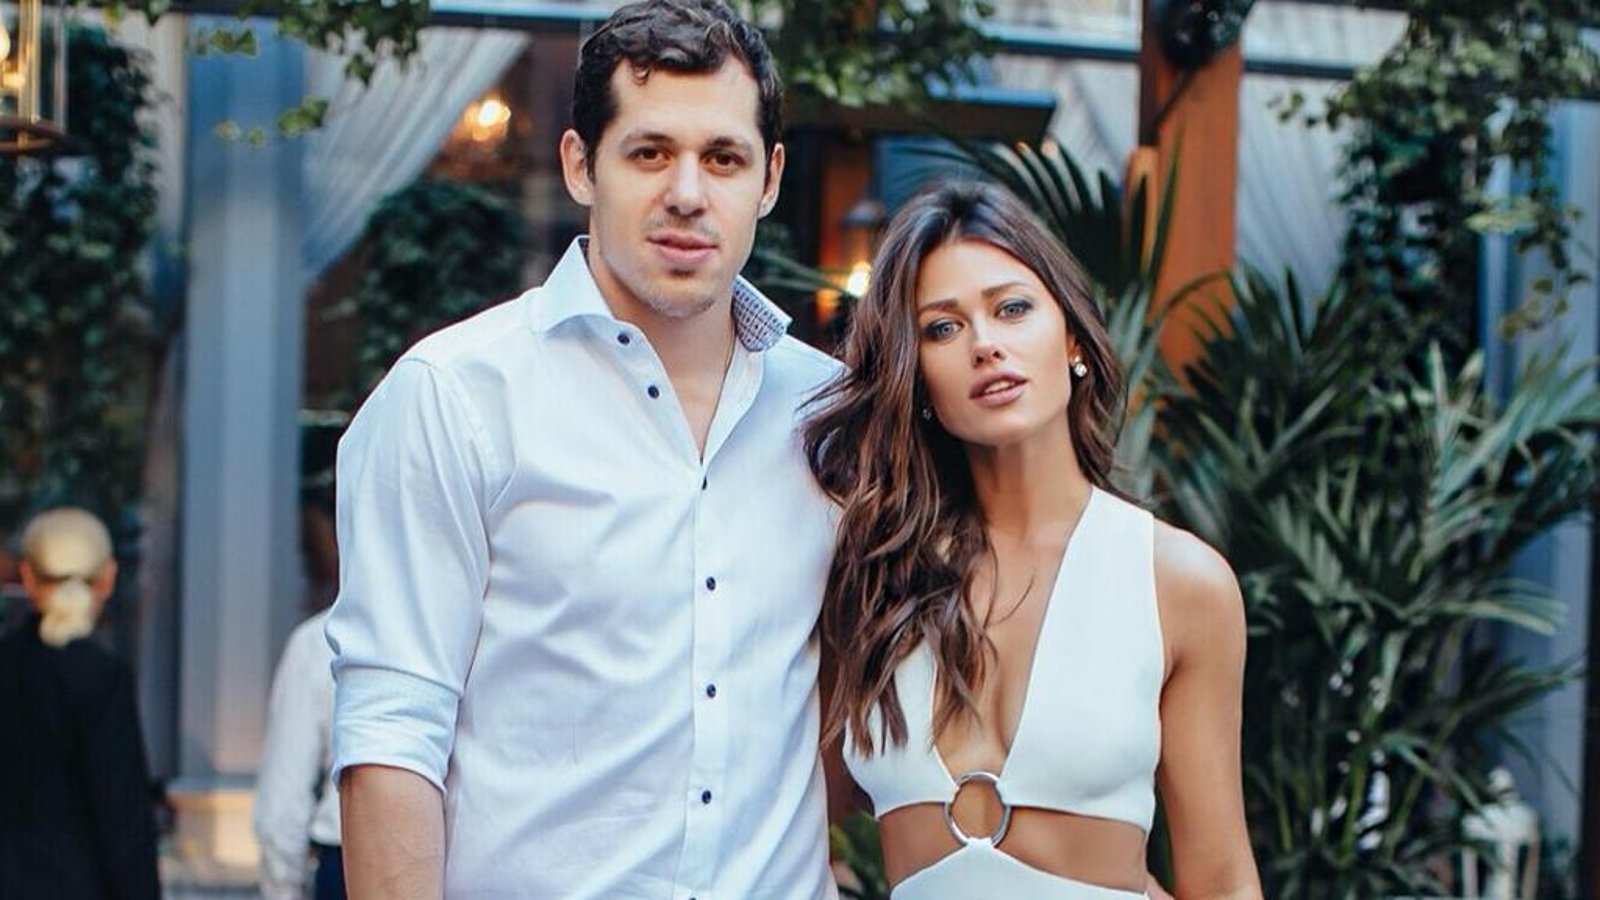 Evgeni Malkin’s wife wants him to leave the Penguins!